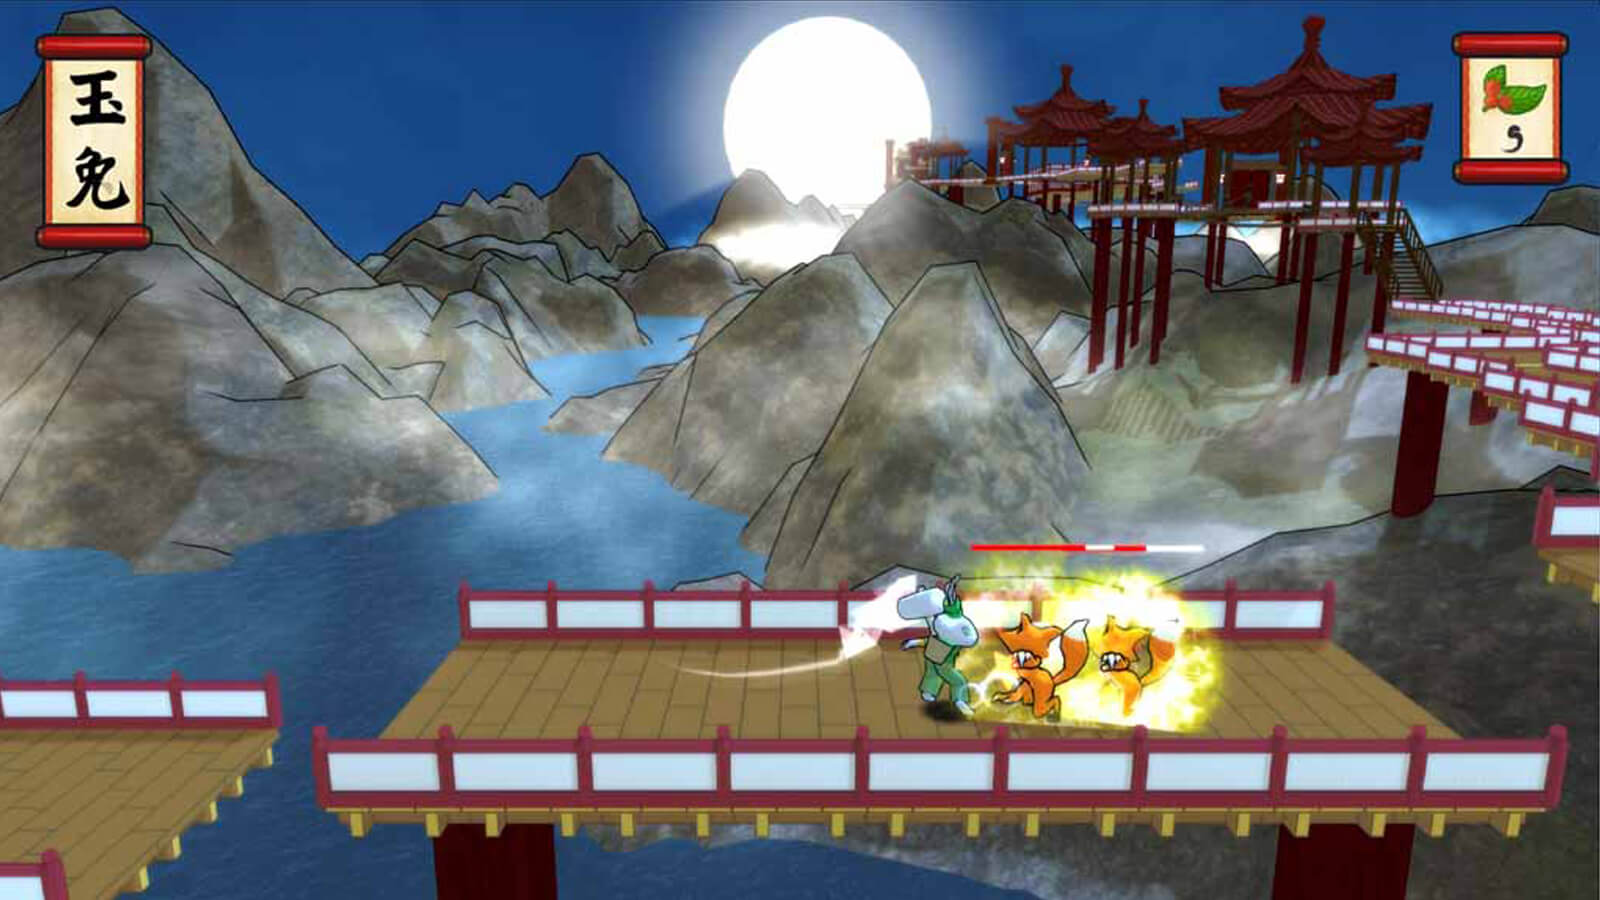 The moon rabbit battles two fox enemies on a bridge with a river, mountains, and a bright moon in the background